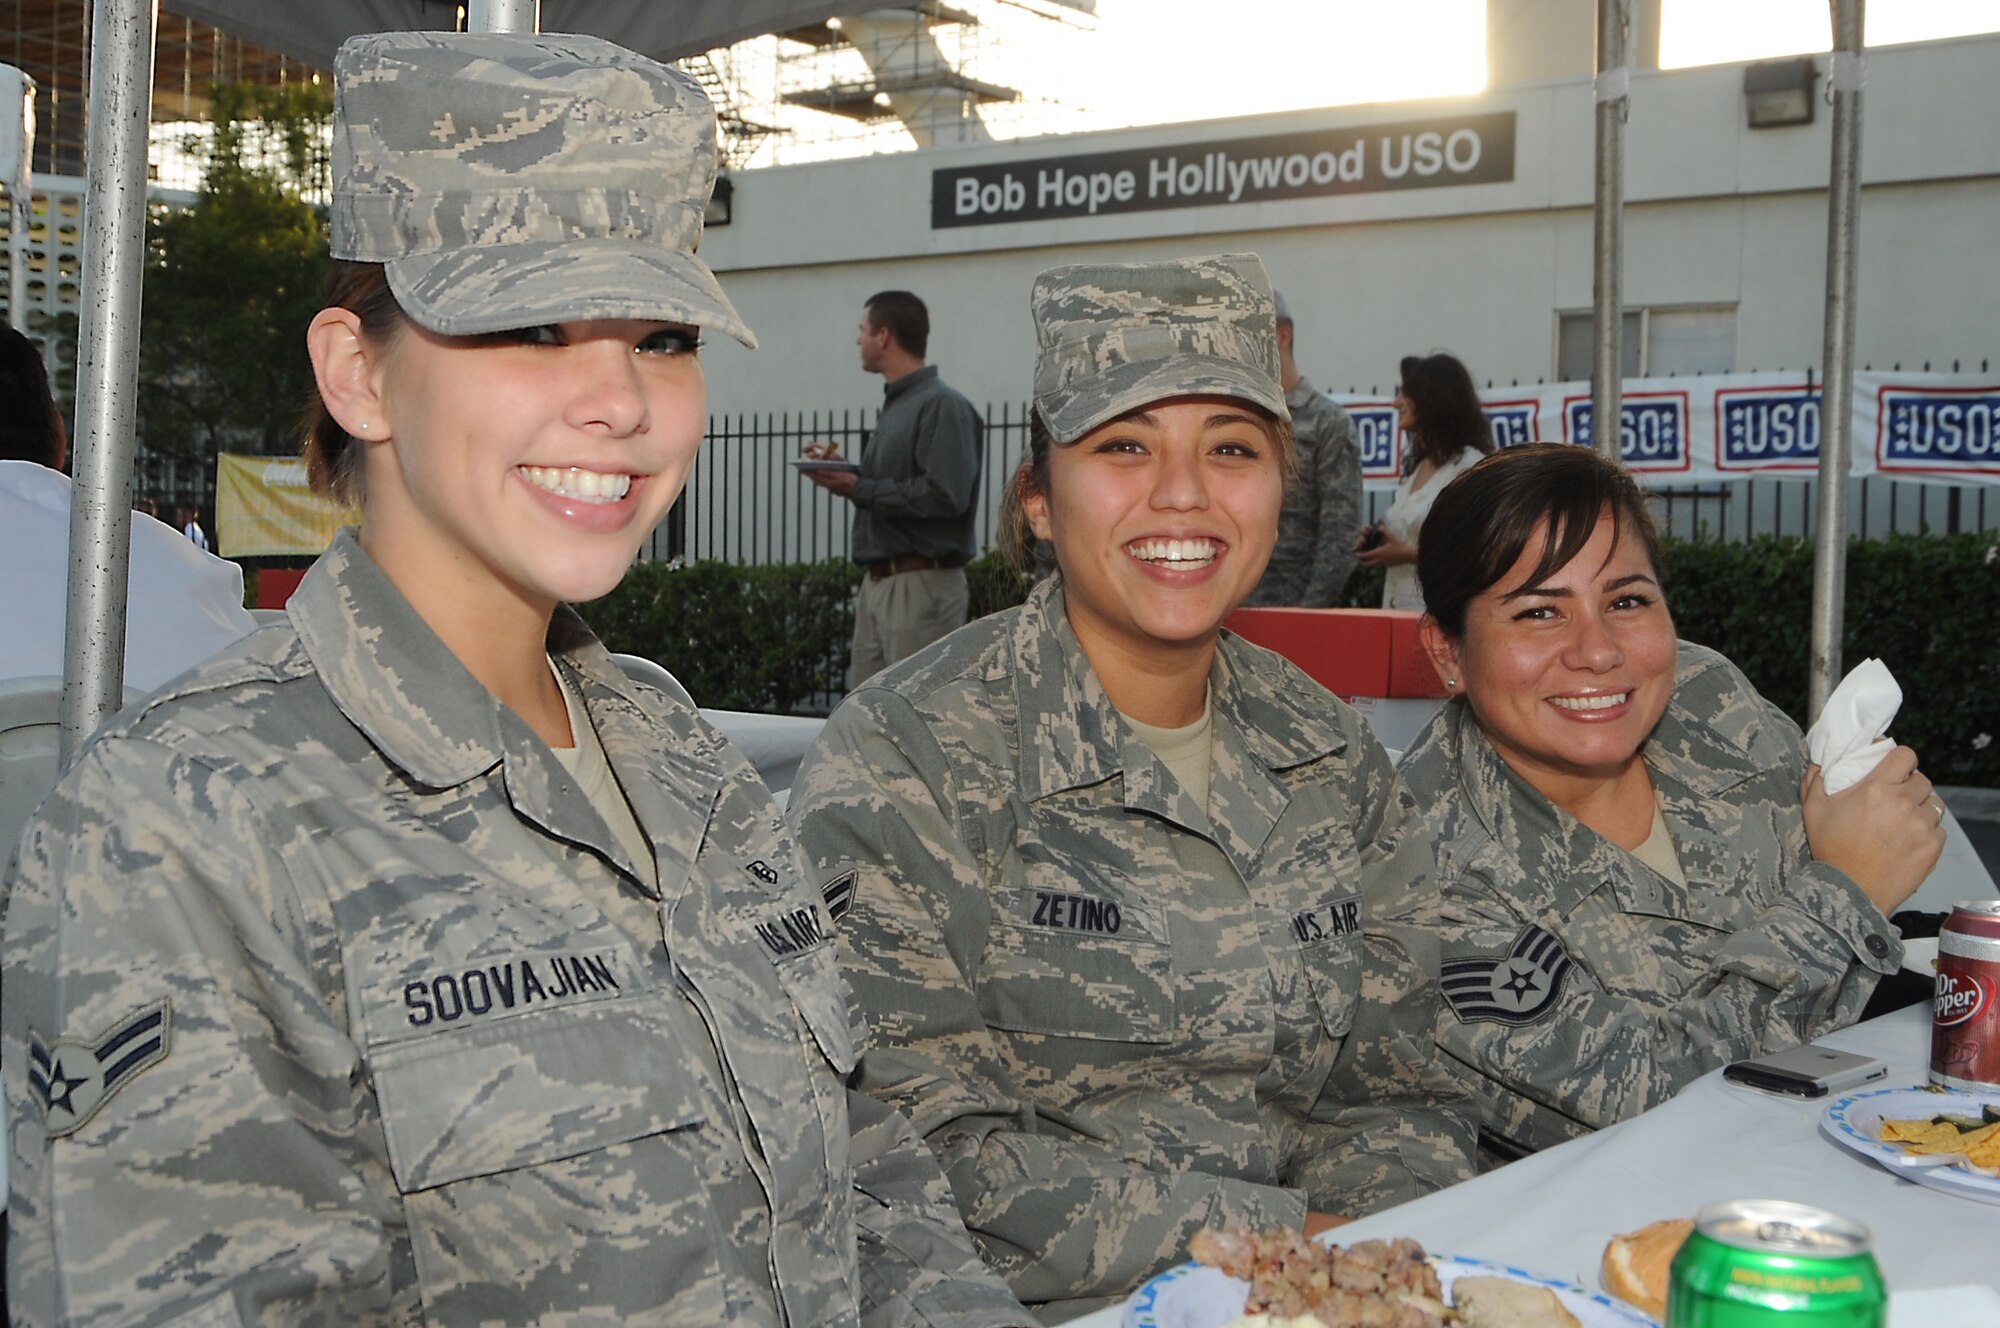 (left to right) Airman 1st Class Linsy Soovajian, Airman 1st Class Eliza Zetino and Staff Sgt. Aida Tappan, all from 61st Medical Group, enjoy their free meal during the Bob Hope Hollywood USO's “Salute to Our Military Personnel” at the Los Angeles International Airport, Nov. 24.  Local and other military troops passing through LAX were treated to an afternoon of pre-Thanksgiving lunch and entertainment.  (Photo by Joe Juarez)